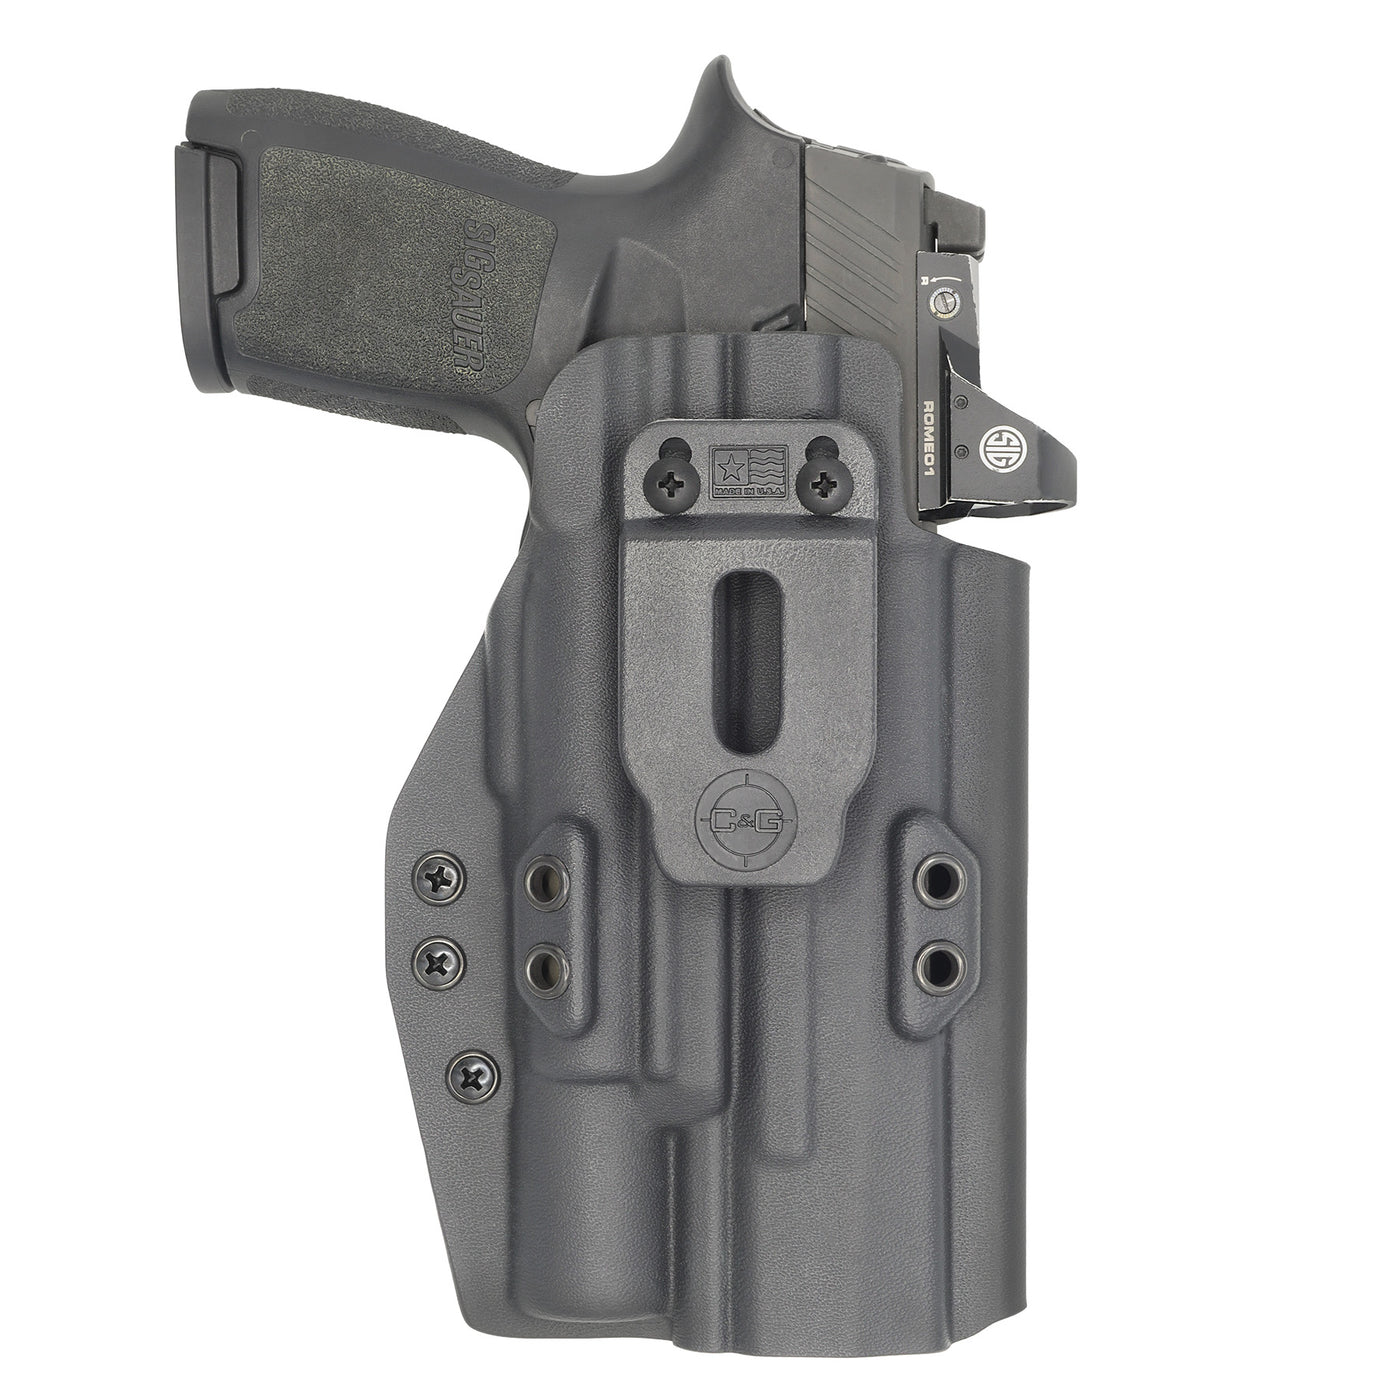 C&G holsters Quickship IWB Tactical Masada Surefire X300 in holstered position